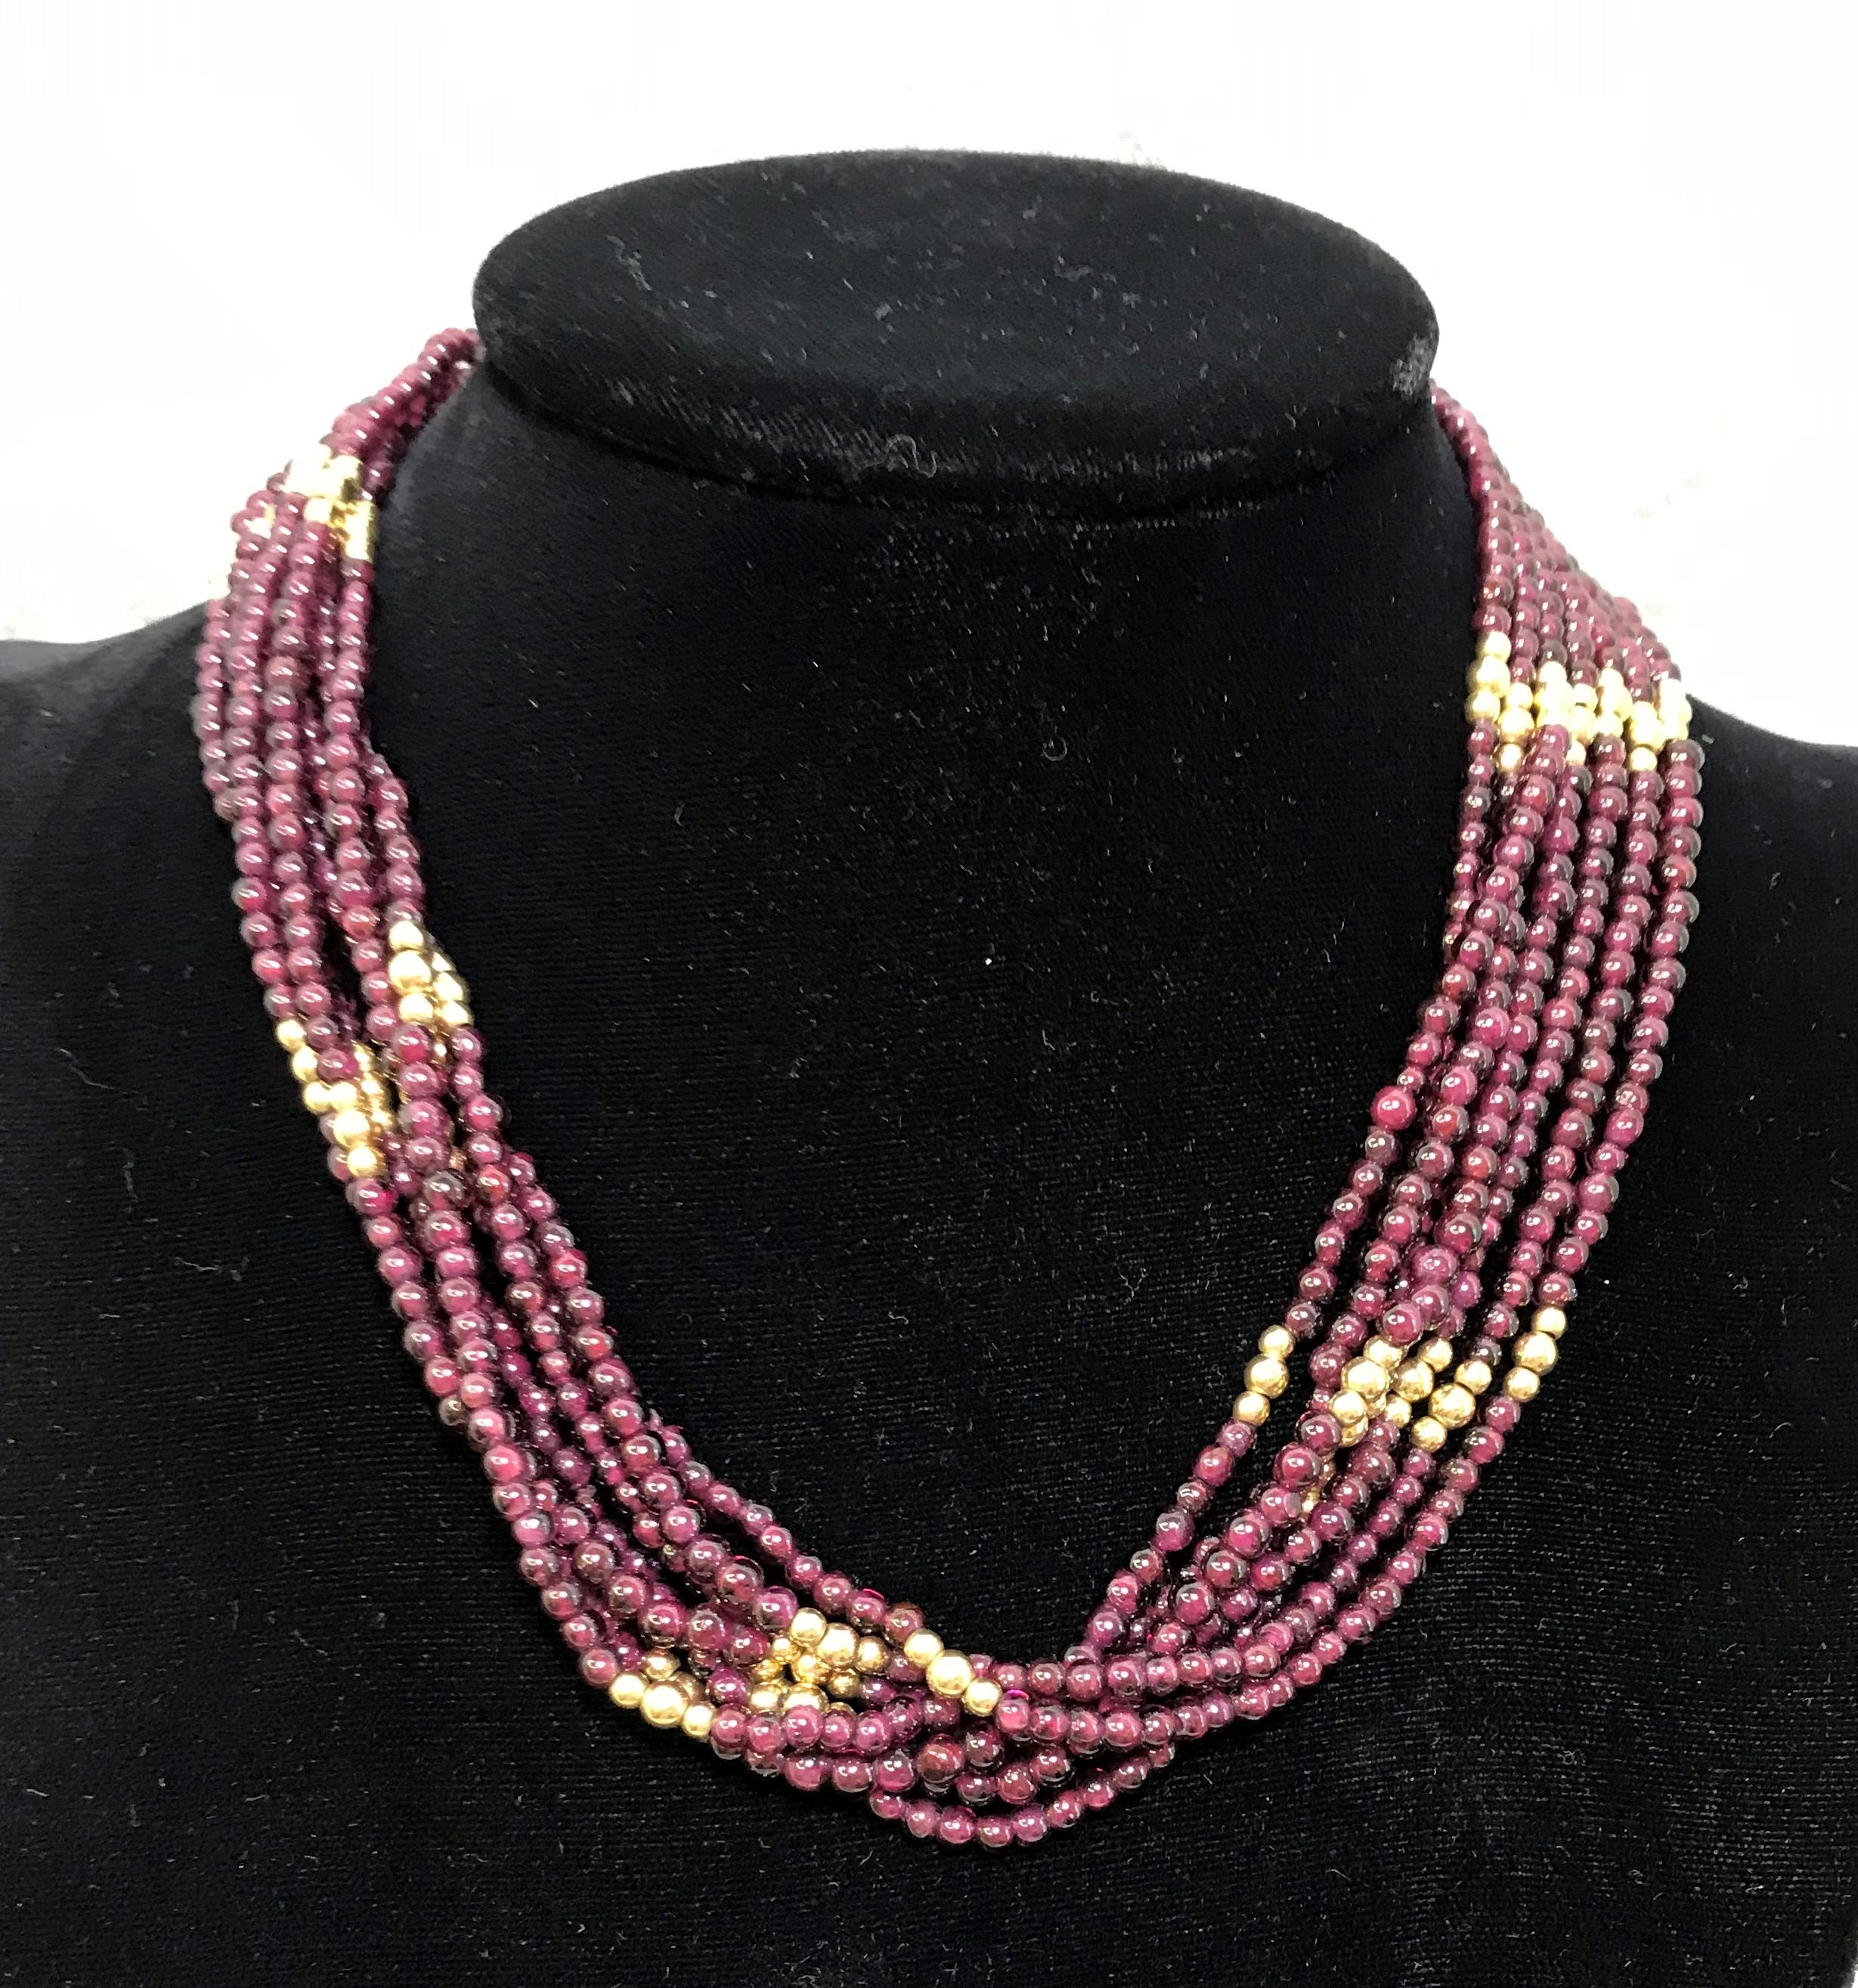 Women's or Men's Garnet and 14 Karat Yellow Gold Bead, 7-Strand Necklace For Sale